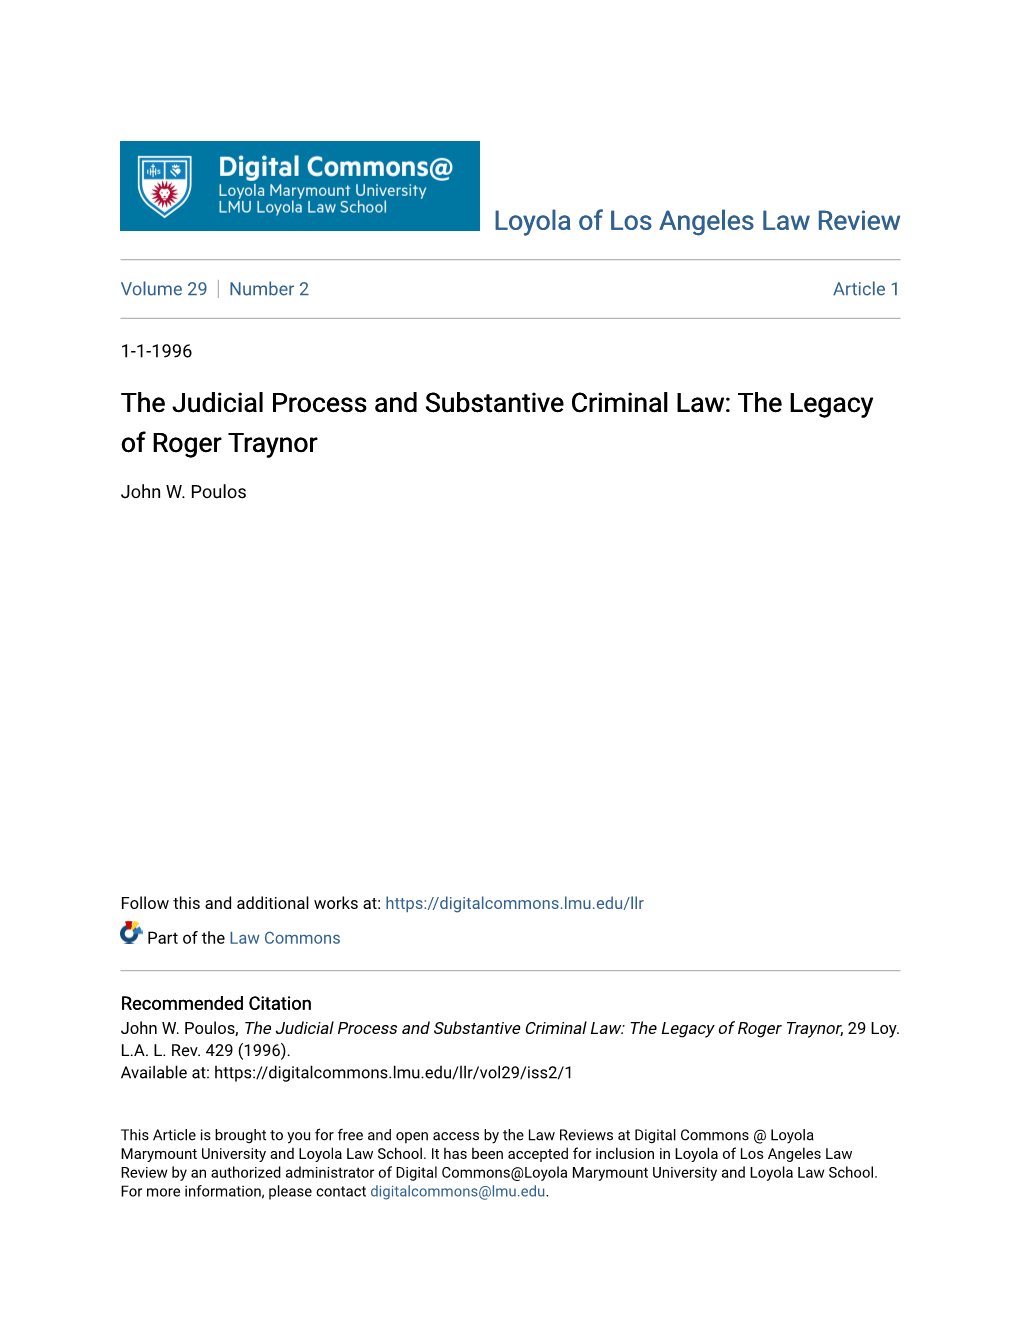 The Judicial Process and Substantive Criminal Law: the Legacy of Roger Traynor